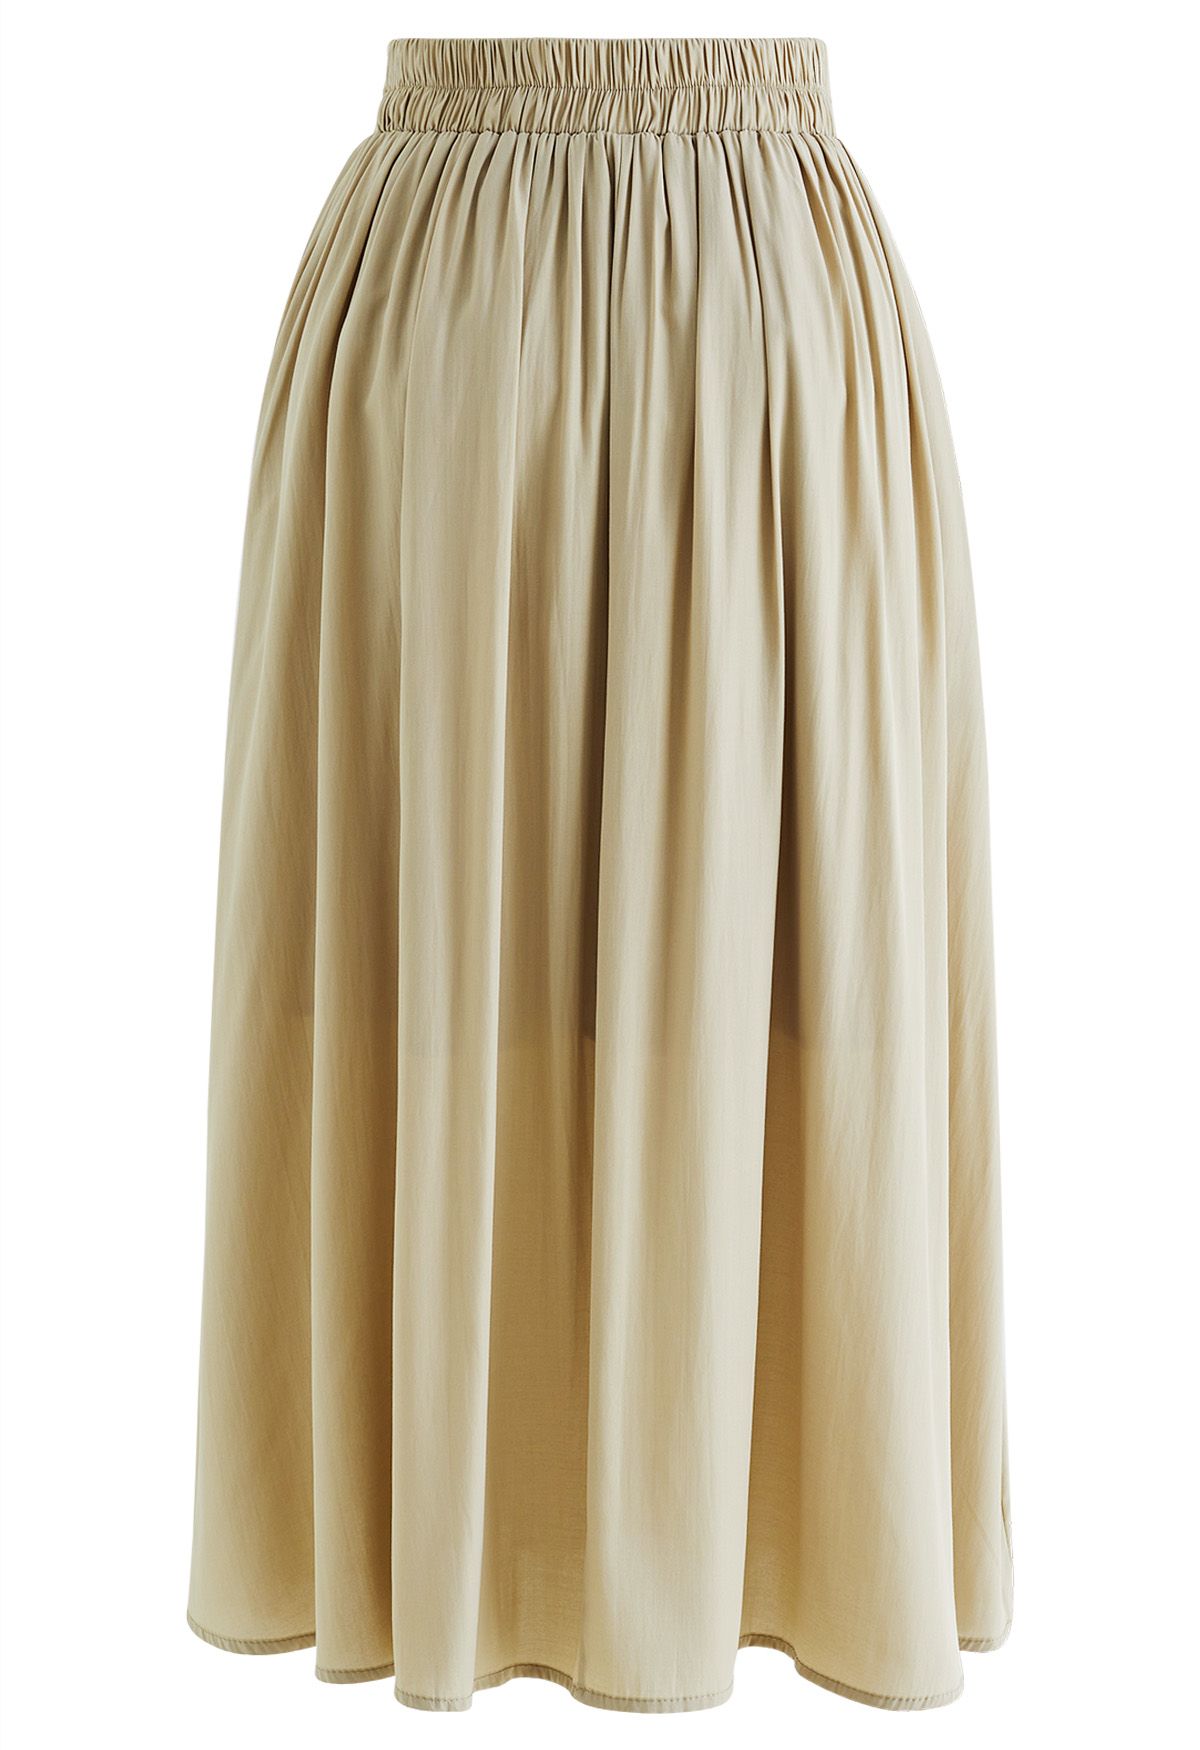 Cross Waist Side Pockets Midi Skirt in Sand - Retro, Indie and Unique ...